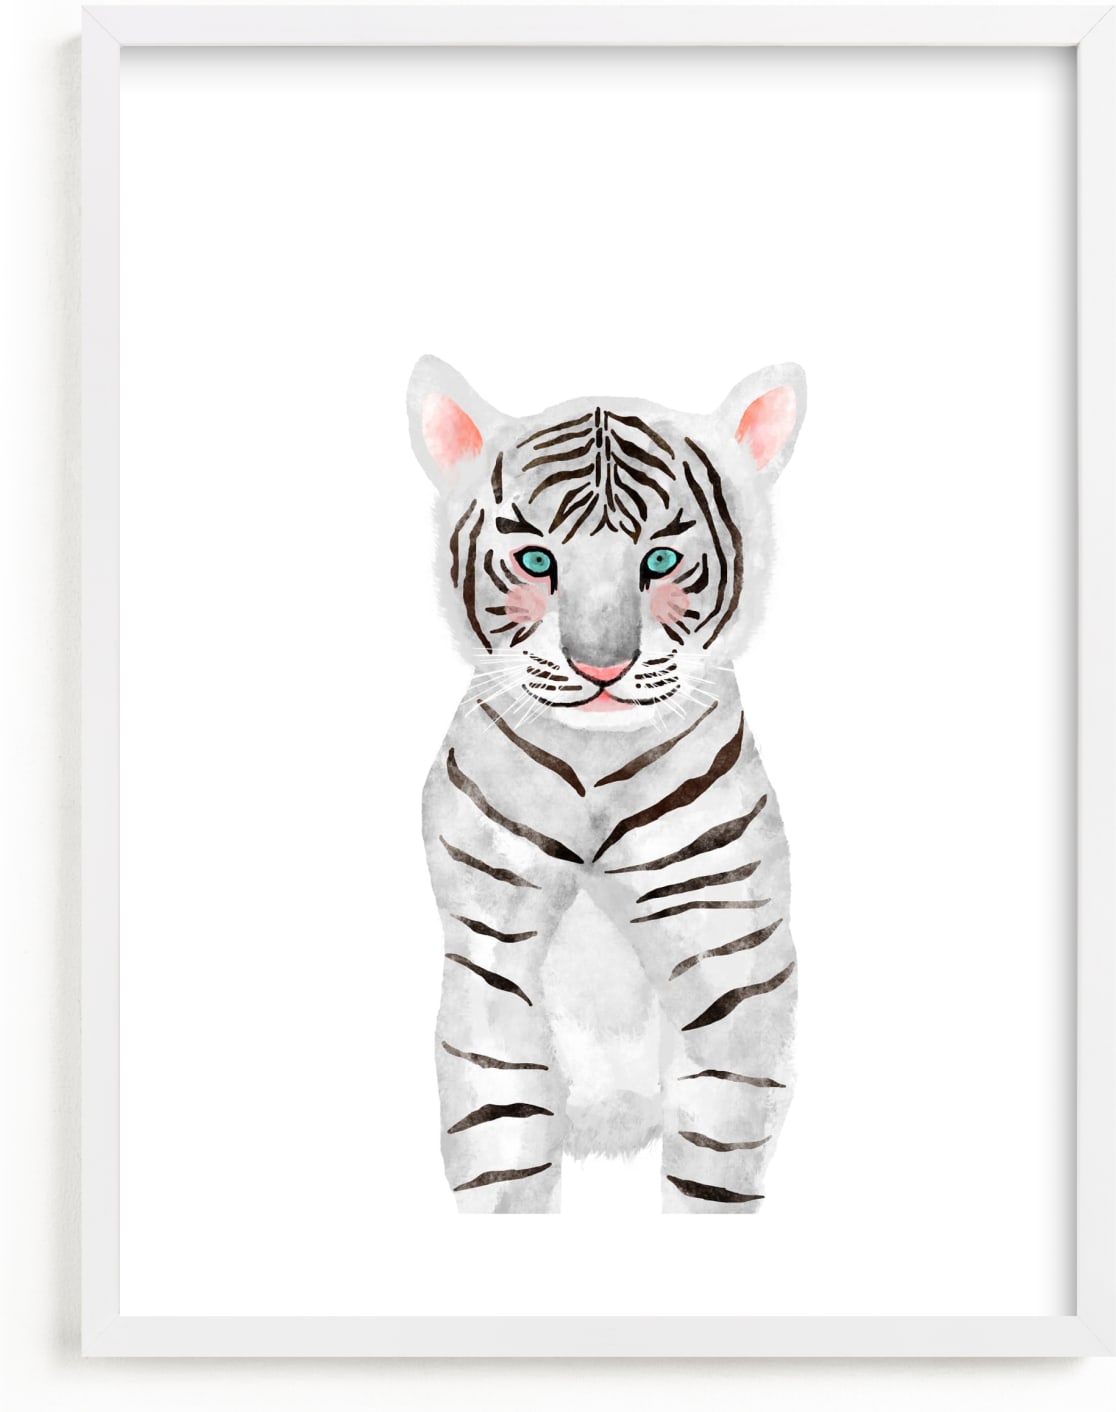 This is a black and white kids wall art by Cass Loh called baby animal.tiger.